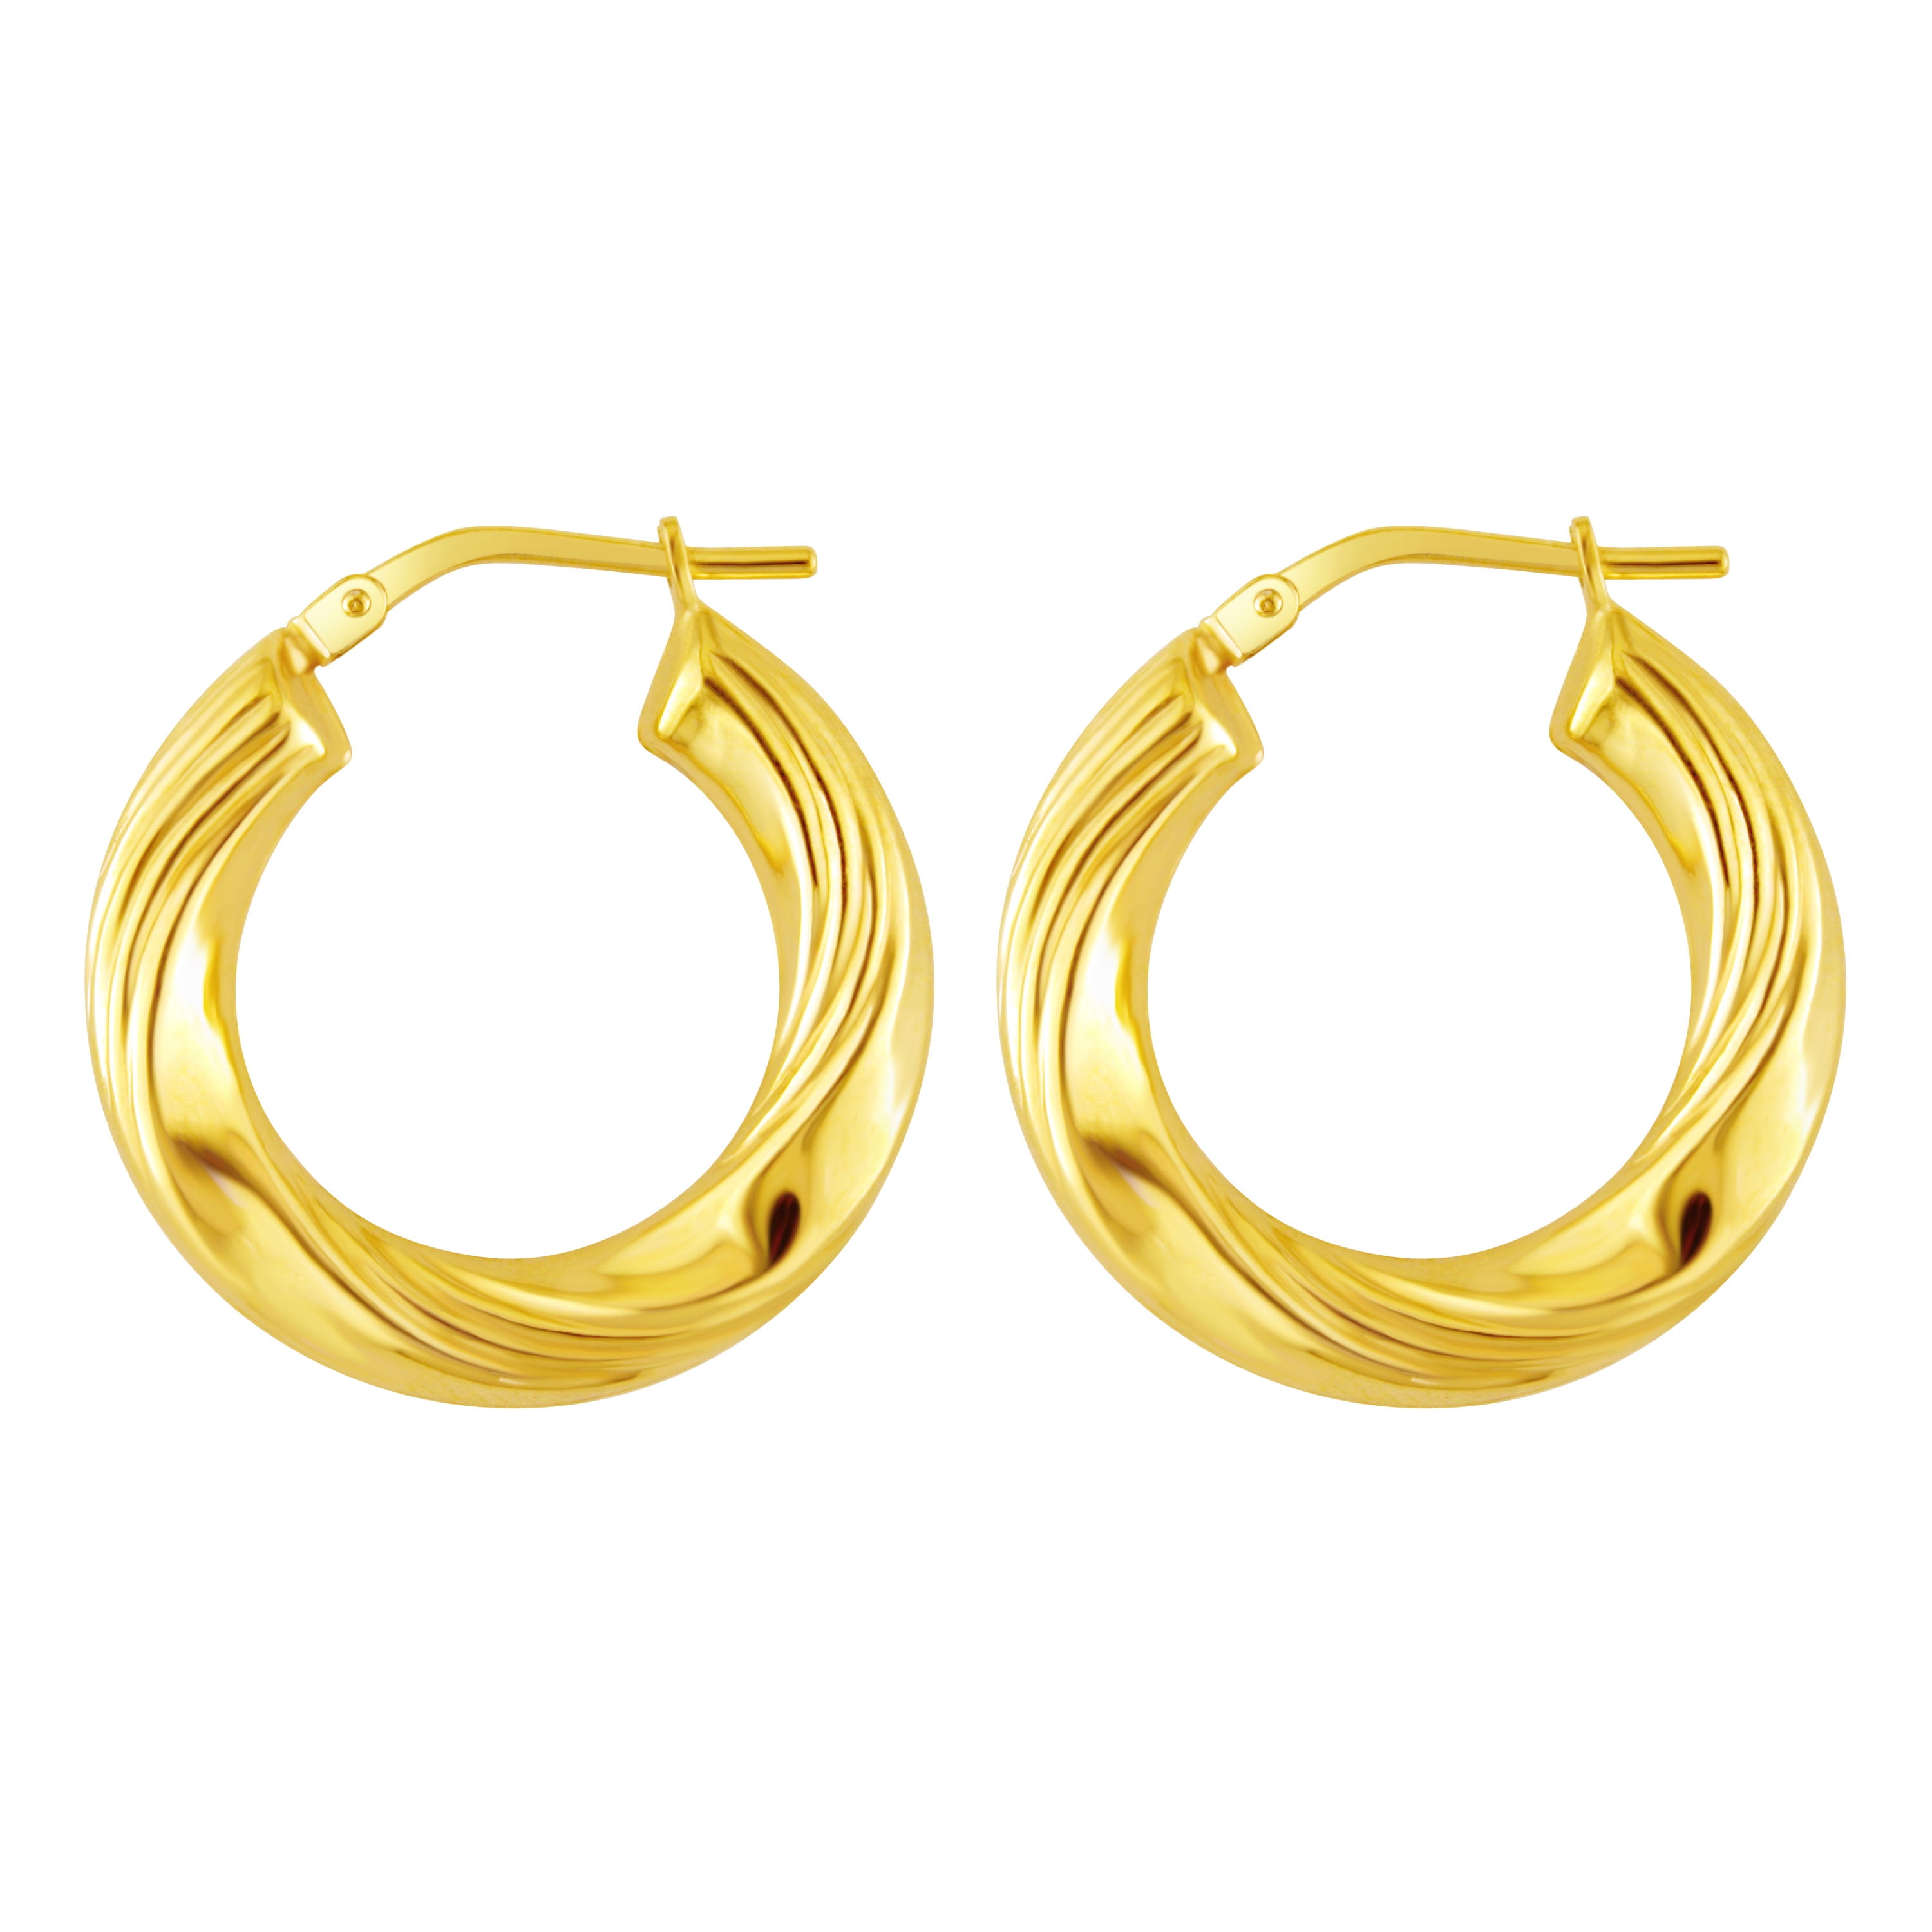 Brilliance Fine Jewelry Women's 14K Gold Plated Sterling Silver Twisted Ribbed Hoop Adults Earrings